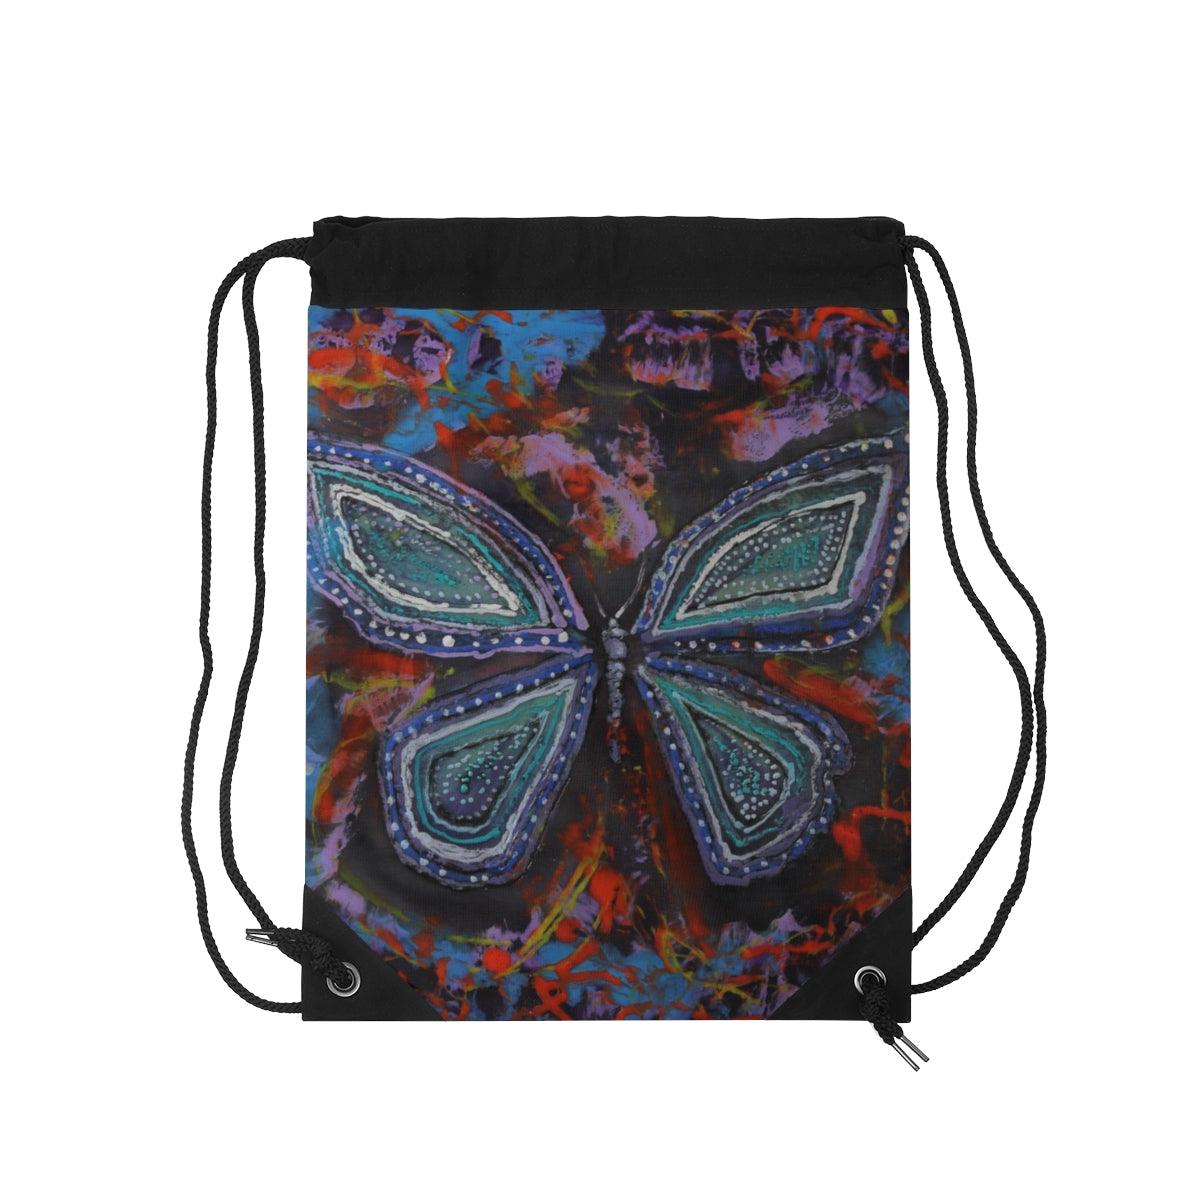 "Butteryfly" Drawstring Bag-Bags - Mike Giannella - Encaustic Painting - Mixed Media Artist - Art Prints